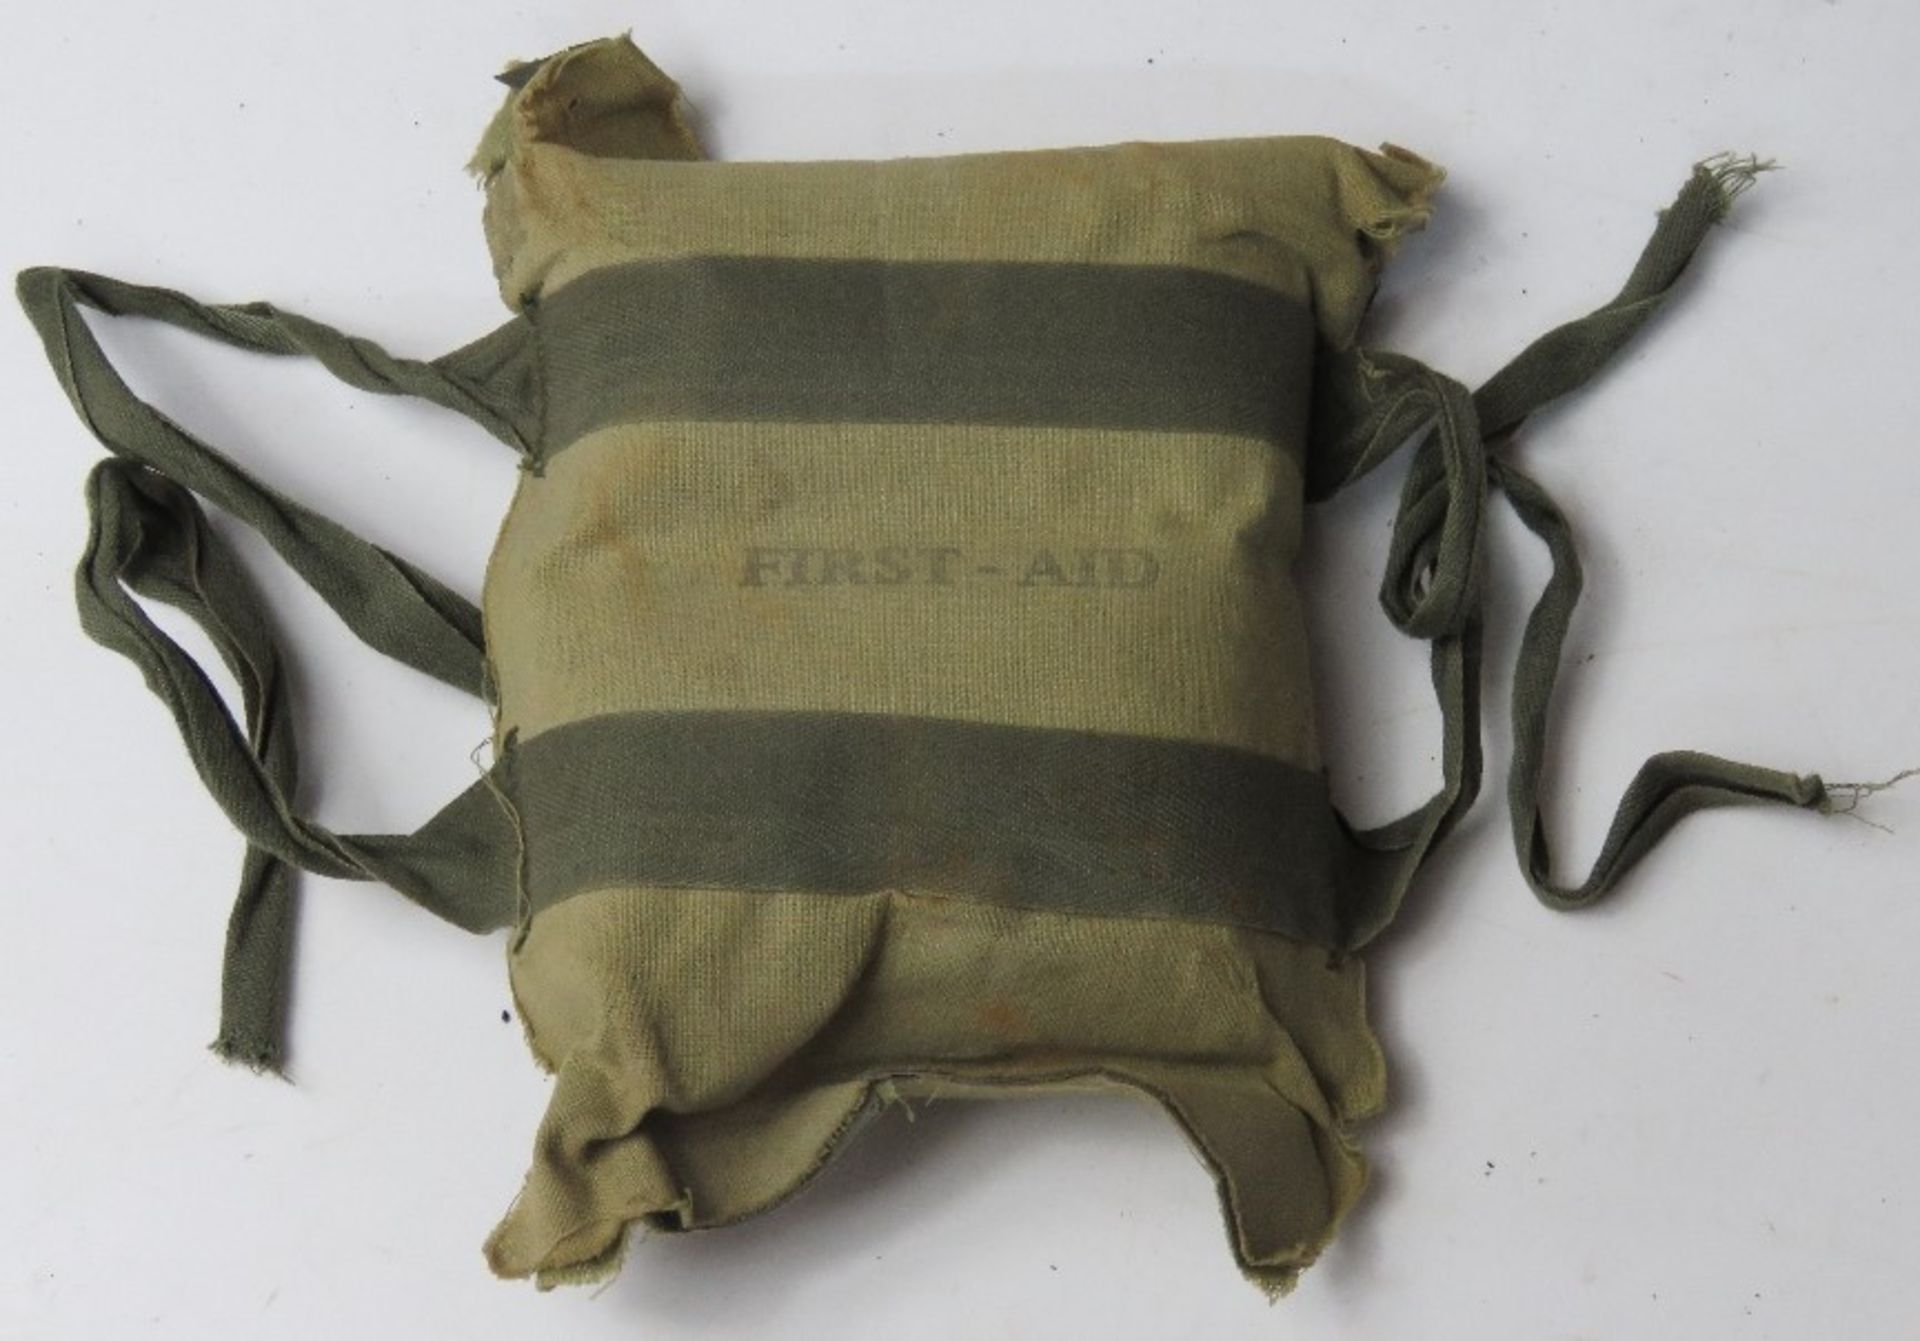 A WWII us airborne helmet first aid pouch.